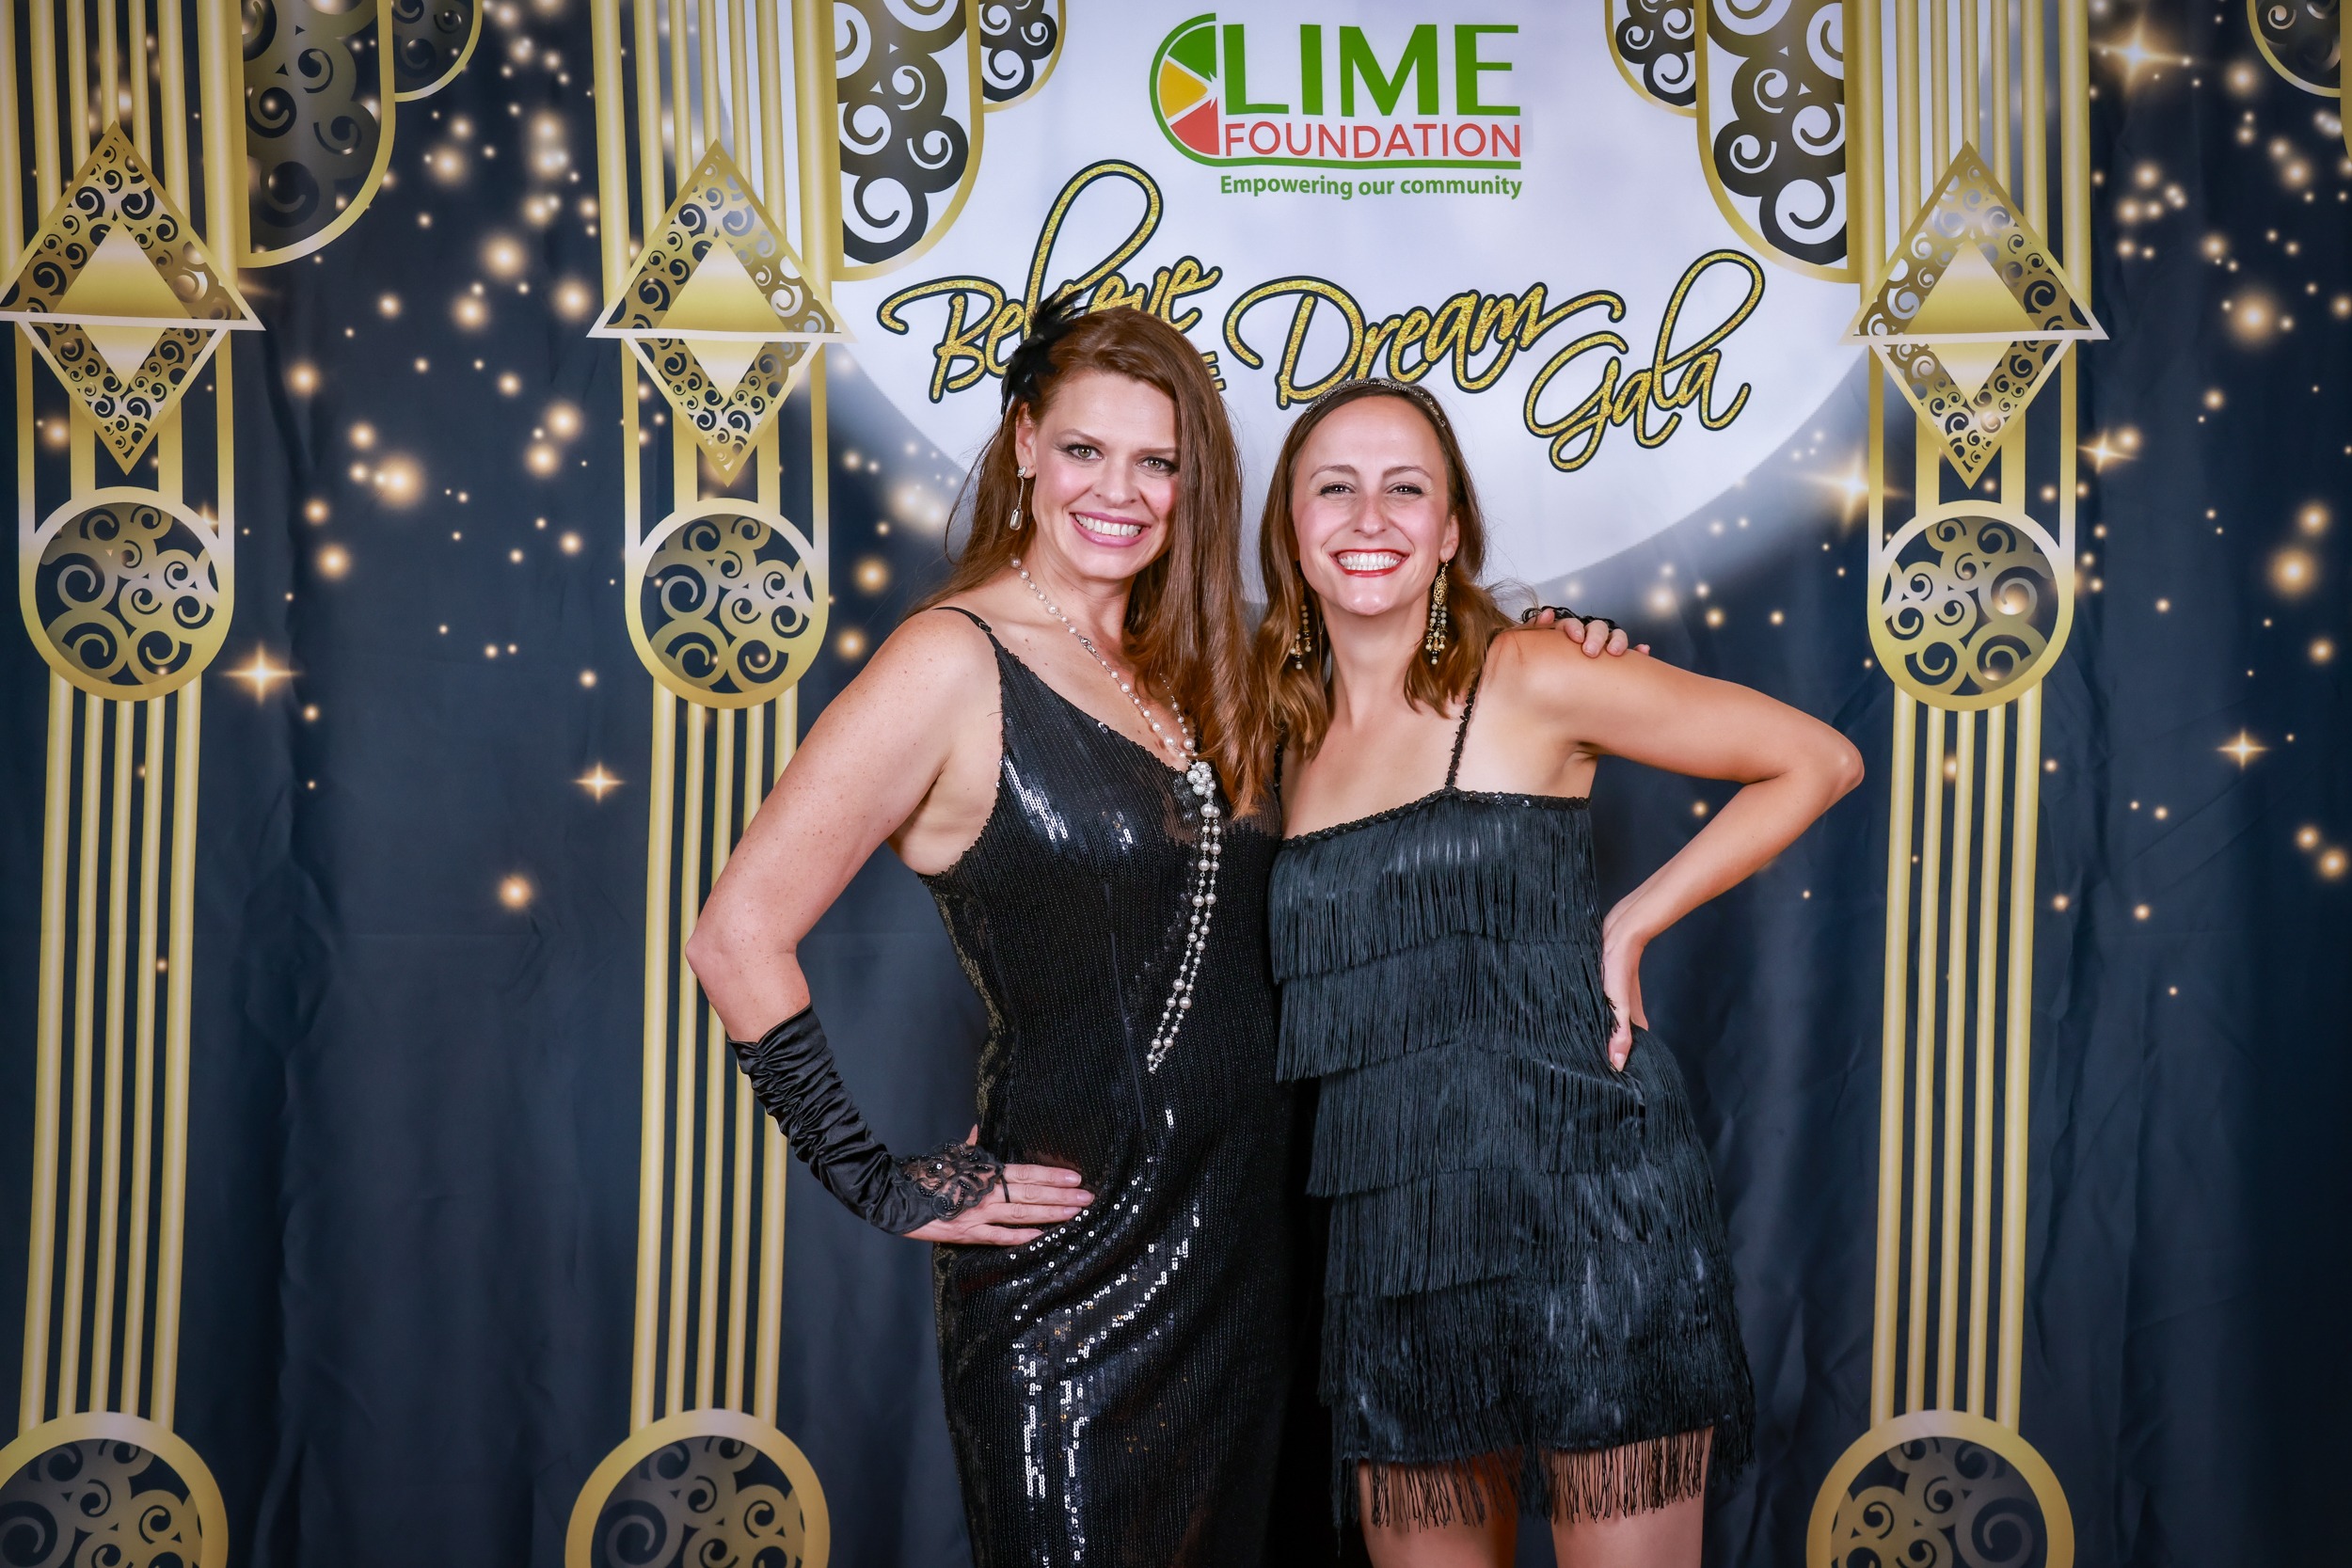 Two women posing for a photo in front of a gilded backdrop at The LIME Foundation of Santa Rosa.